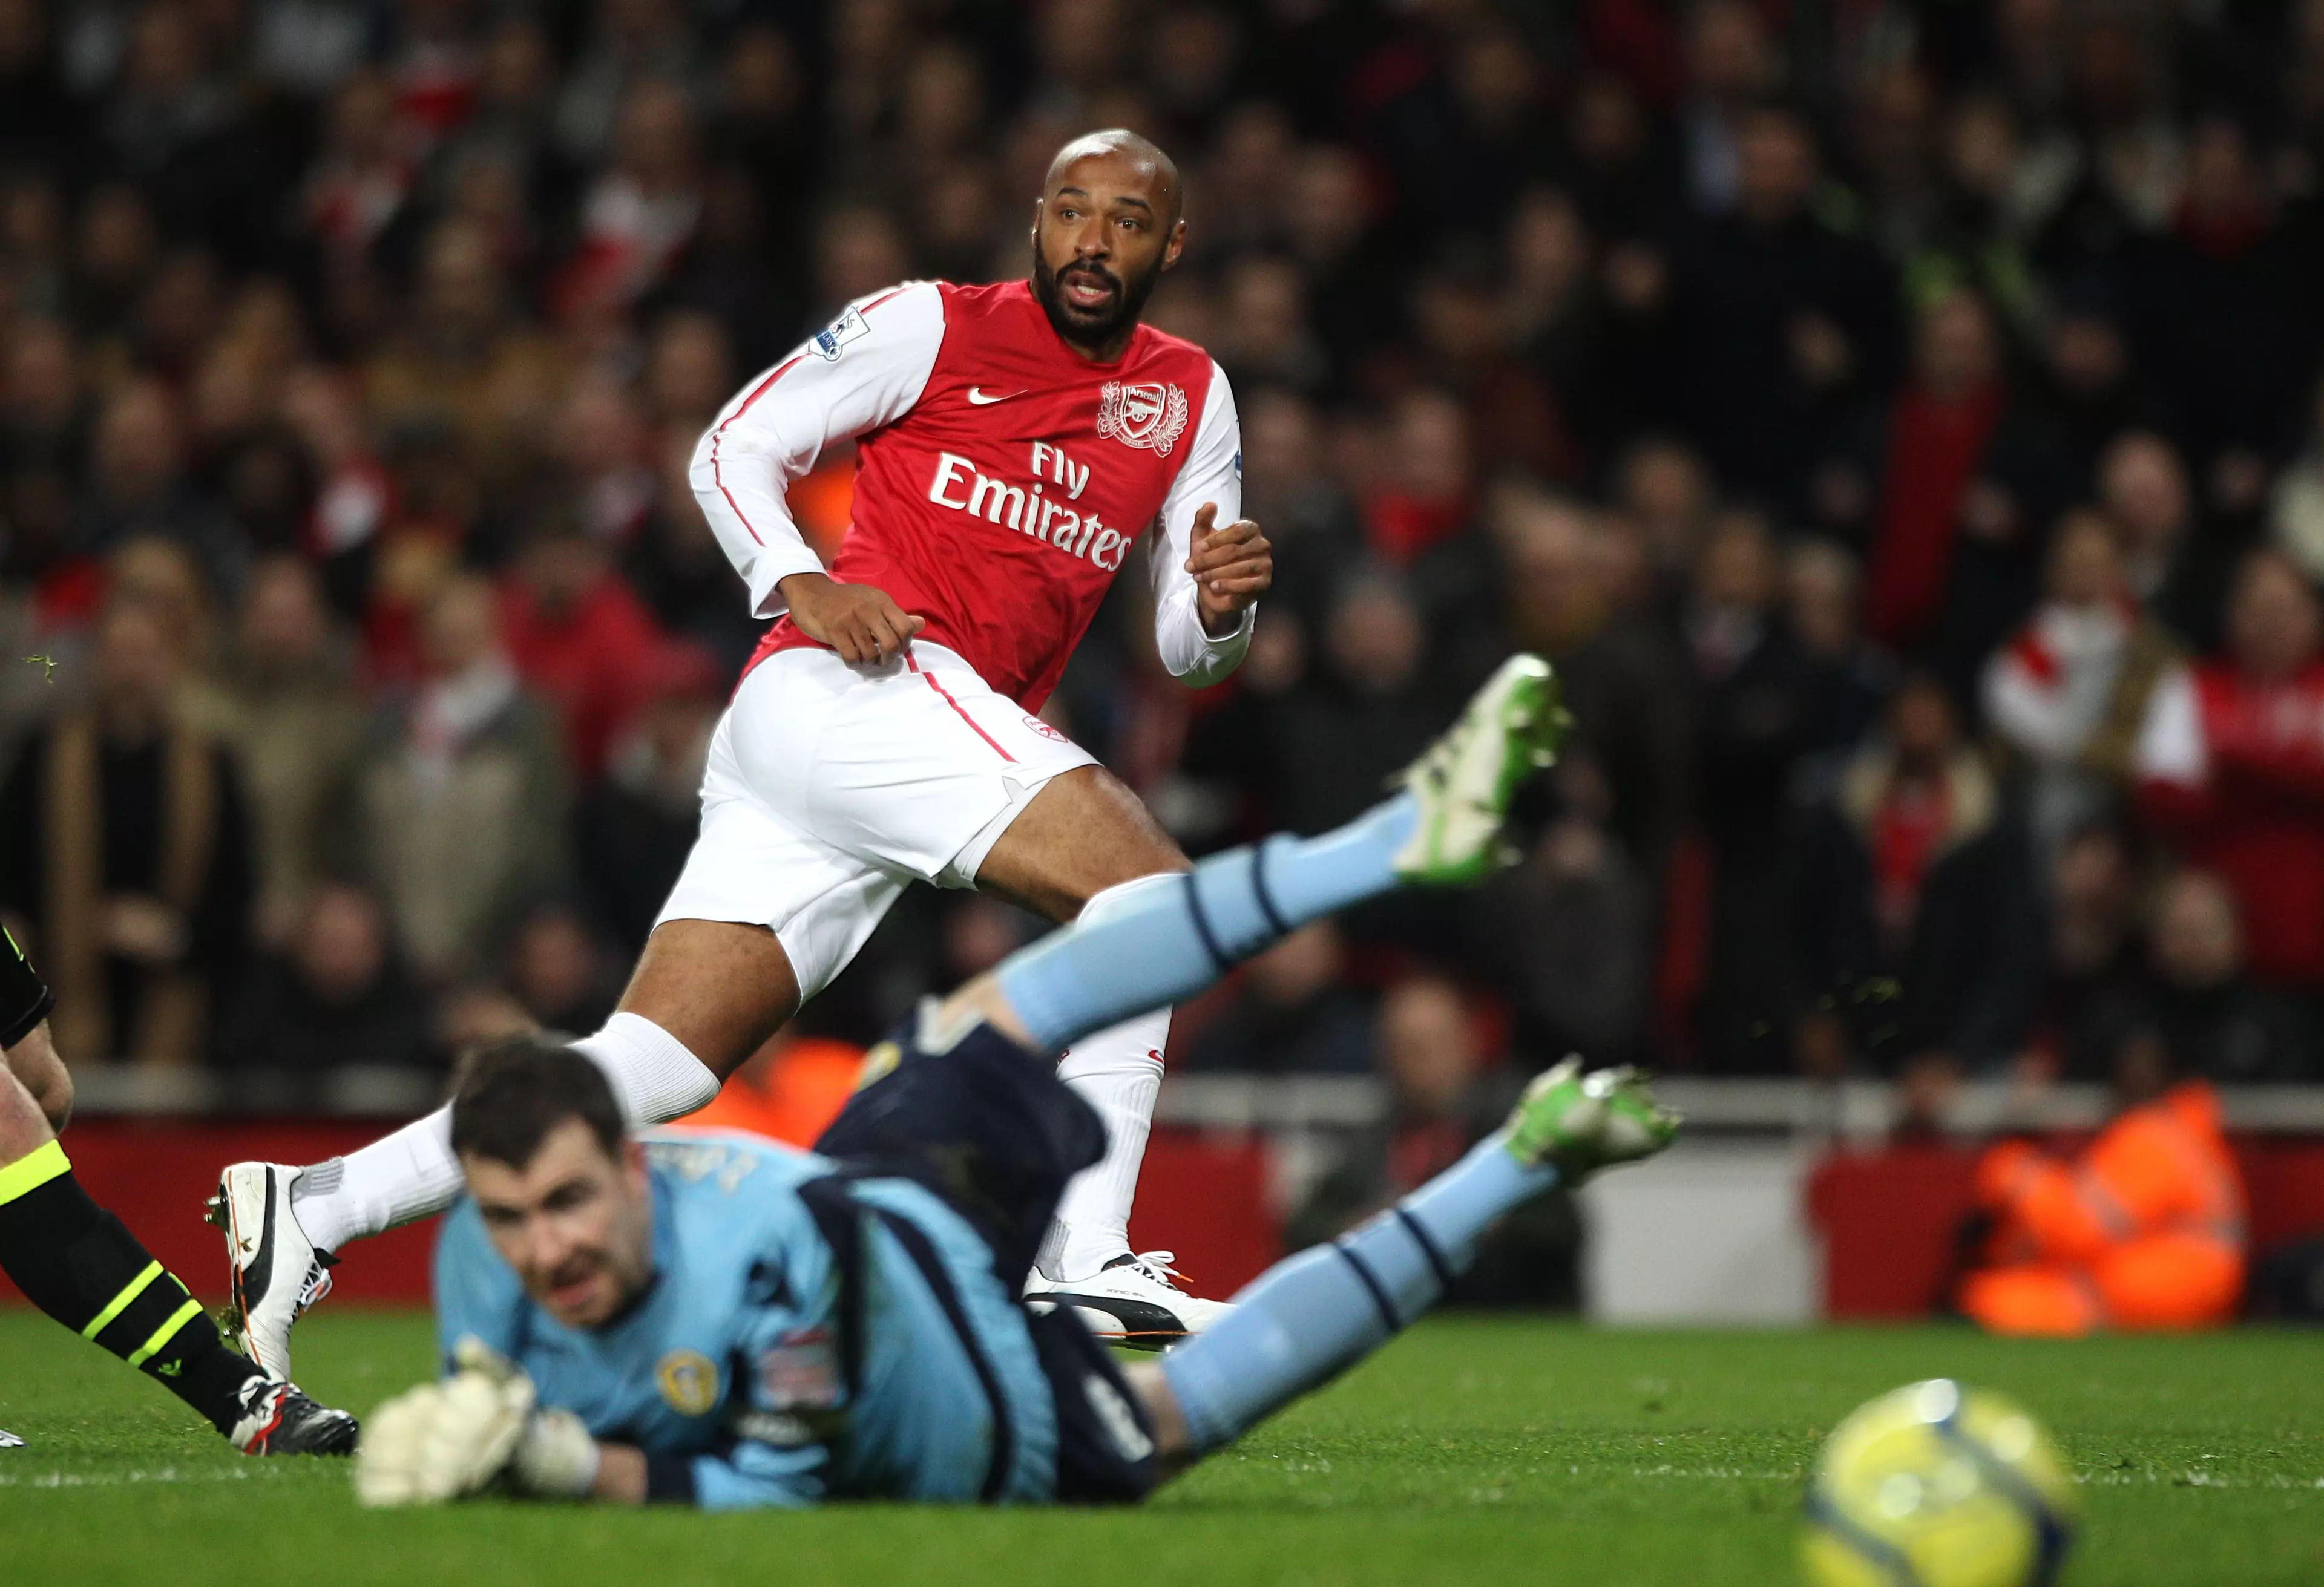 Arsenal's Thierry Henry scores the opening goal of the game. Image: PA